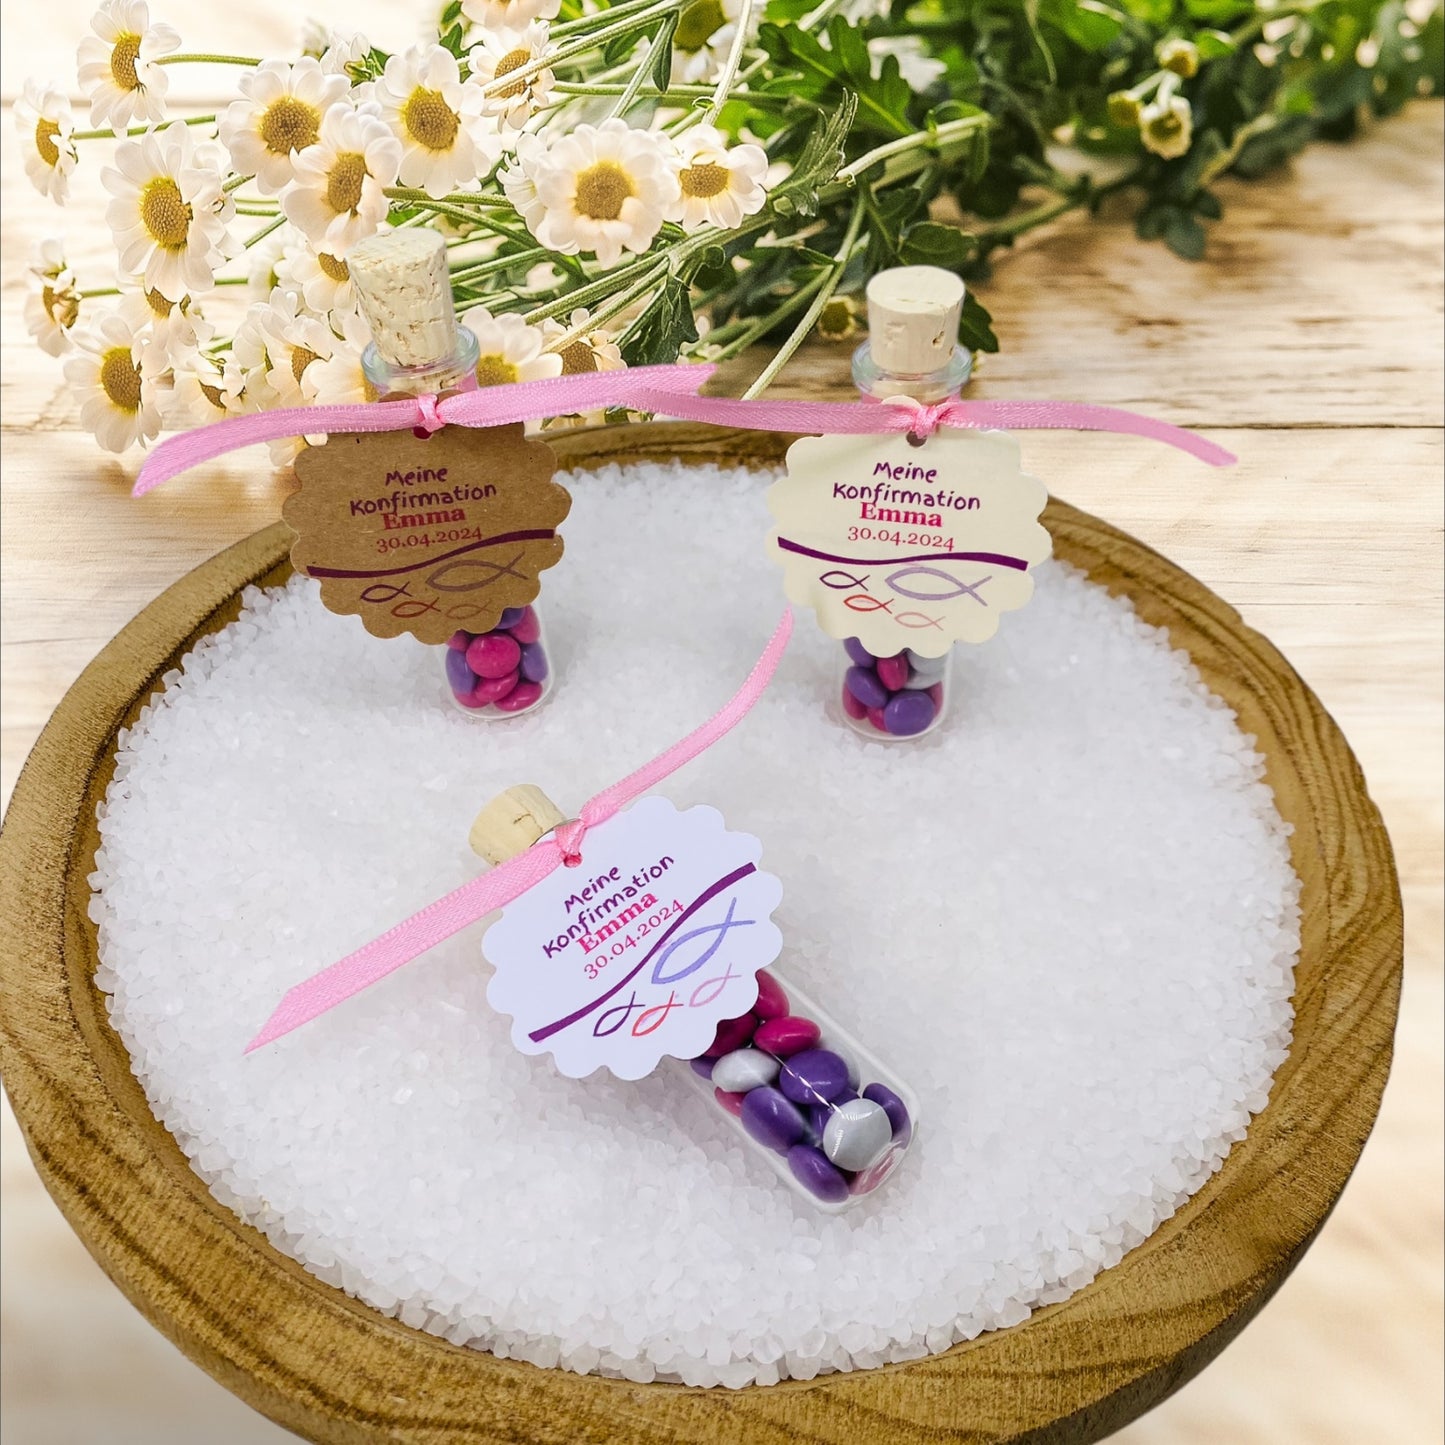 Harmony in sweetness and style: Personalized guest gift for girls, baptism, confirmation and communion